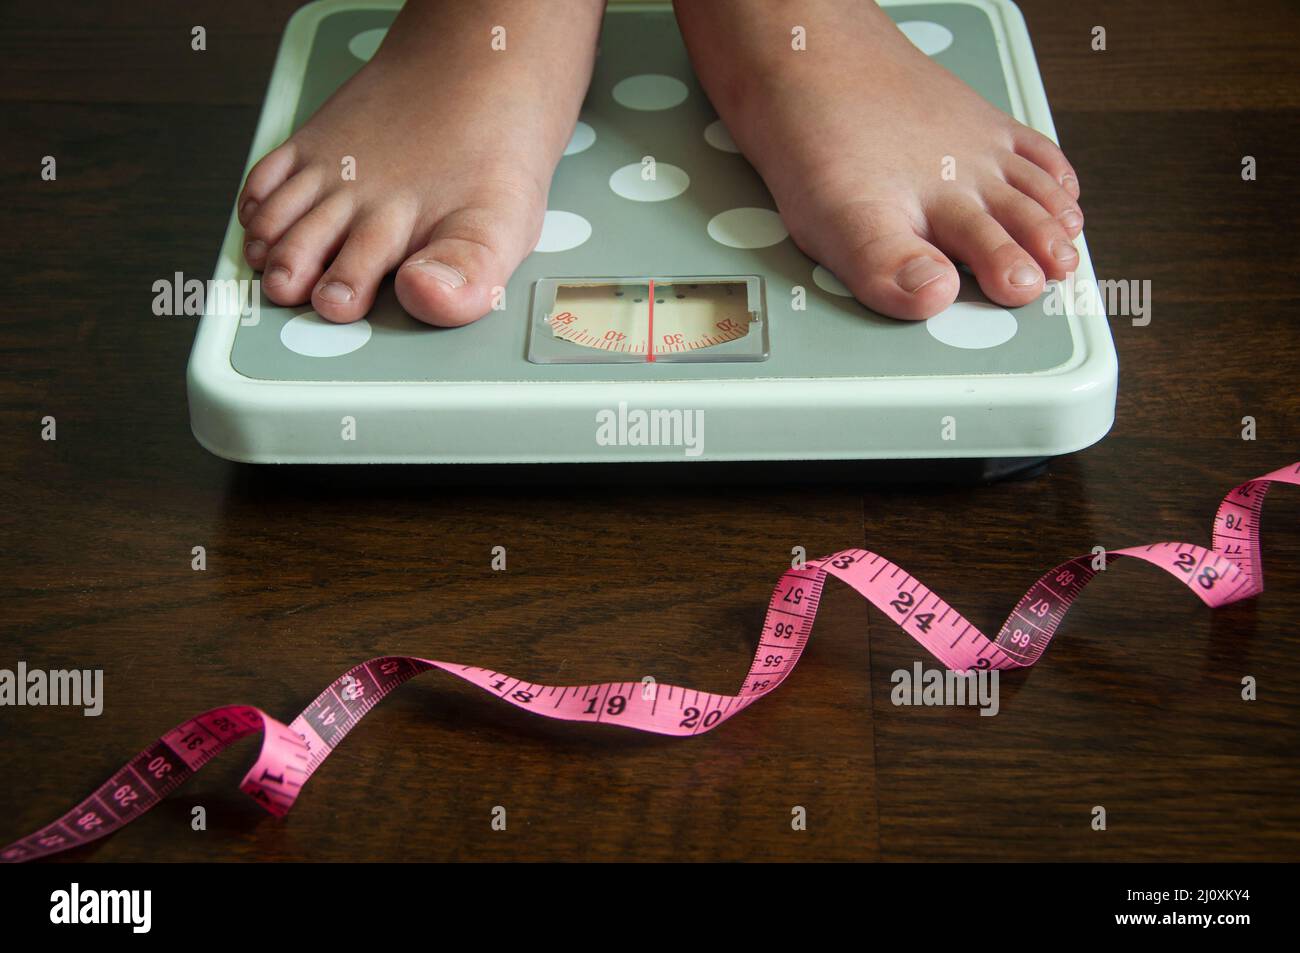 Straight view of measuring tape and feet on weight scale . Weight loss and fitness concept. Stock Photo